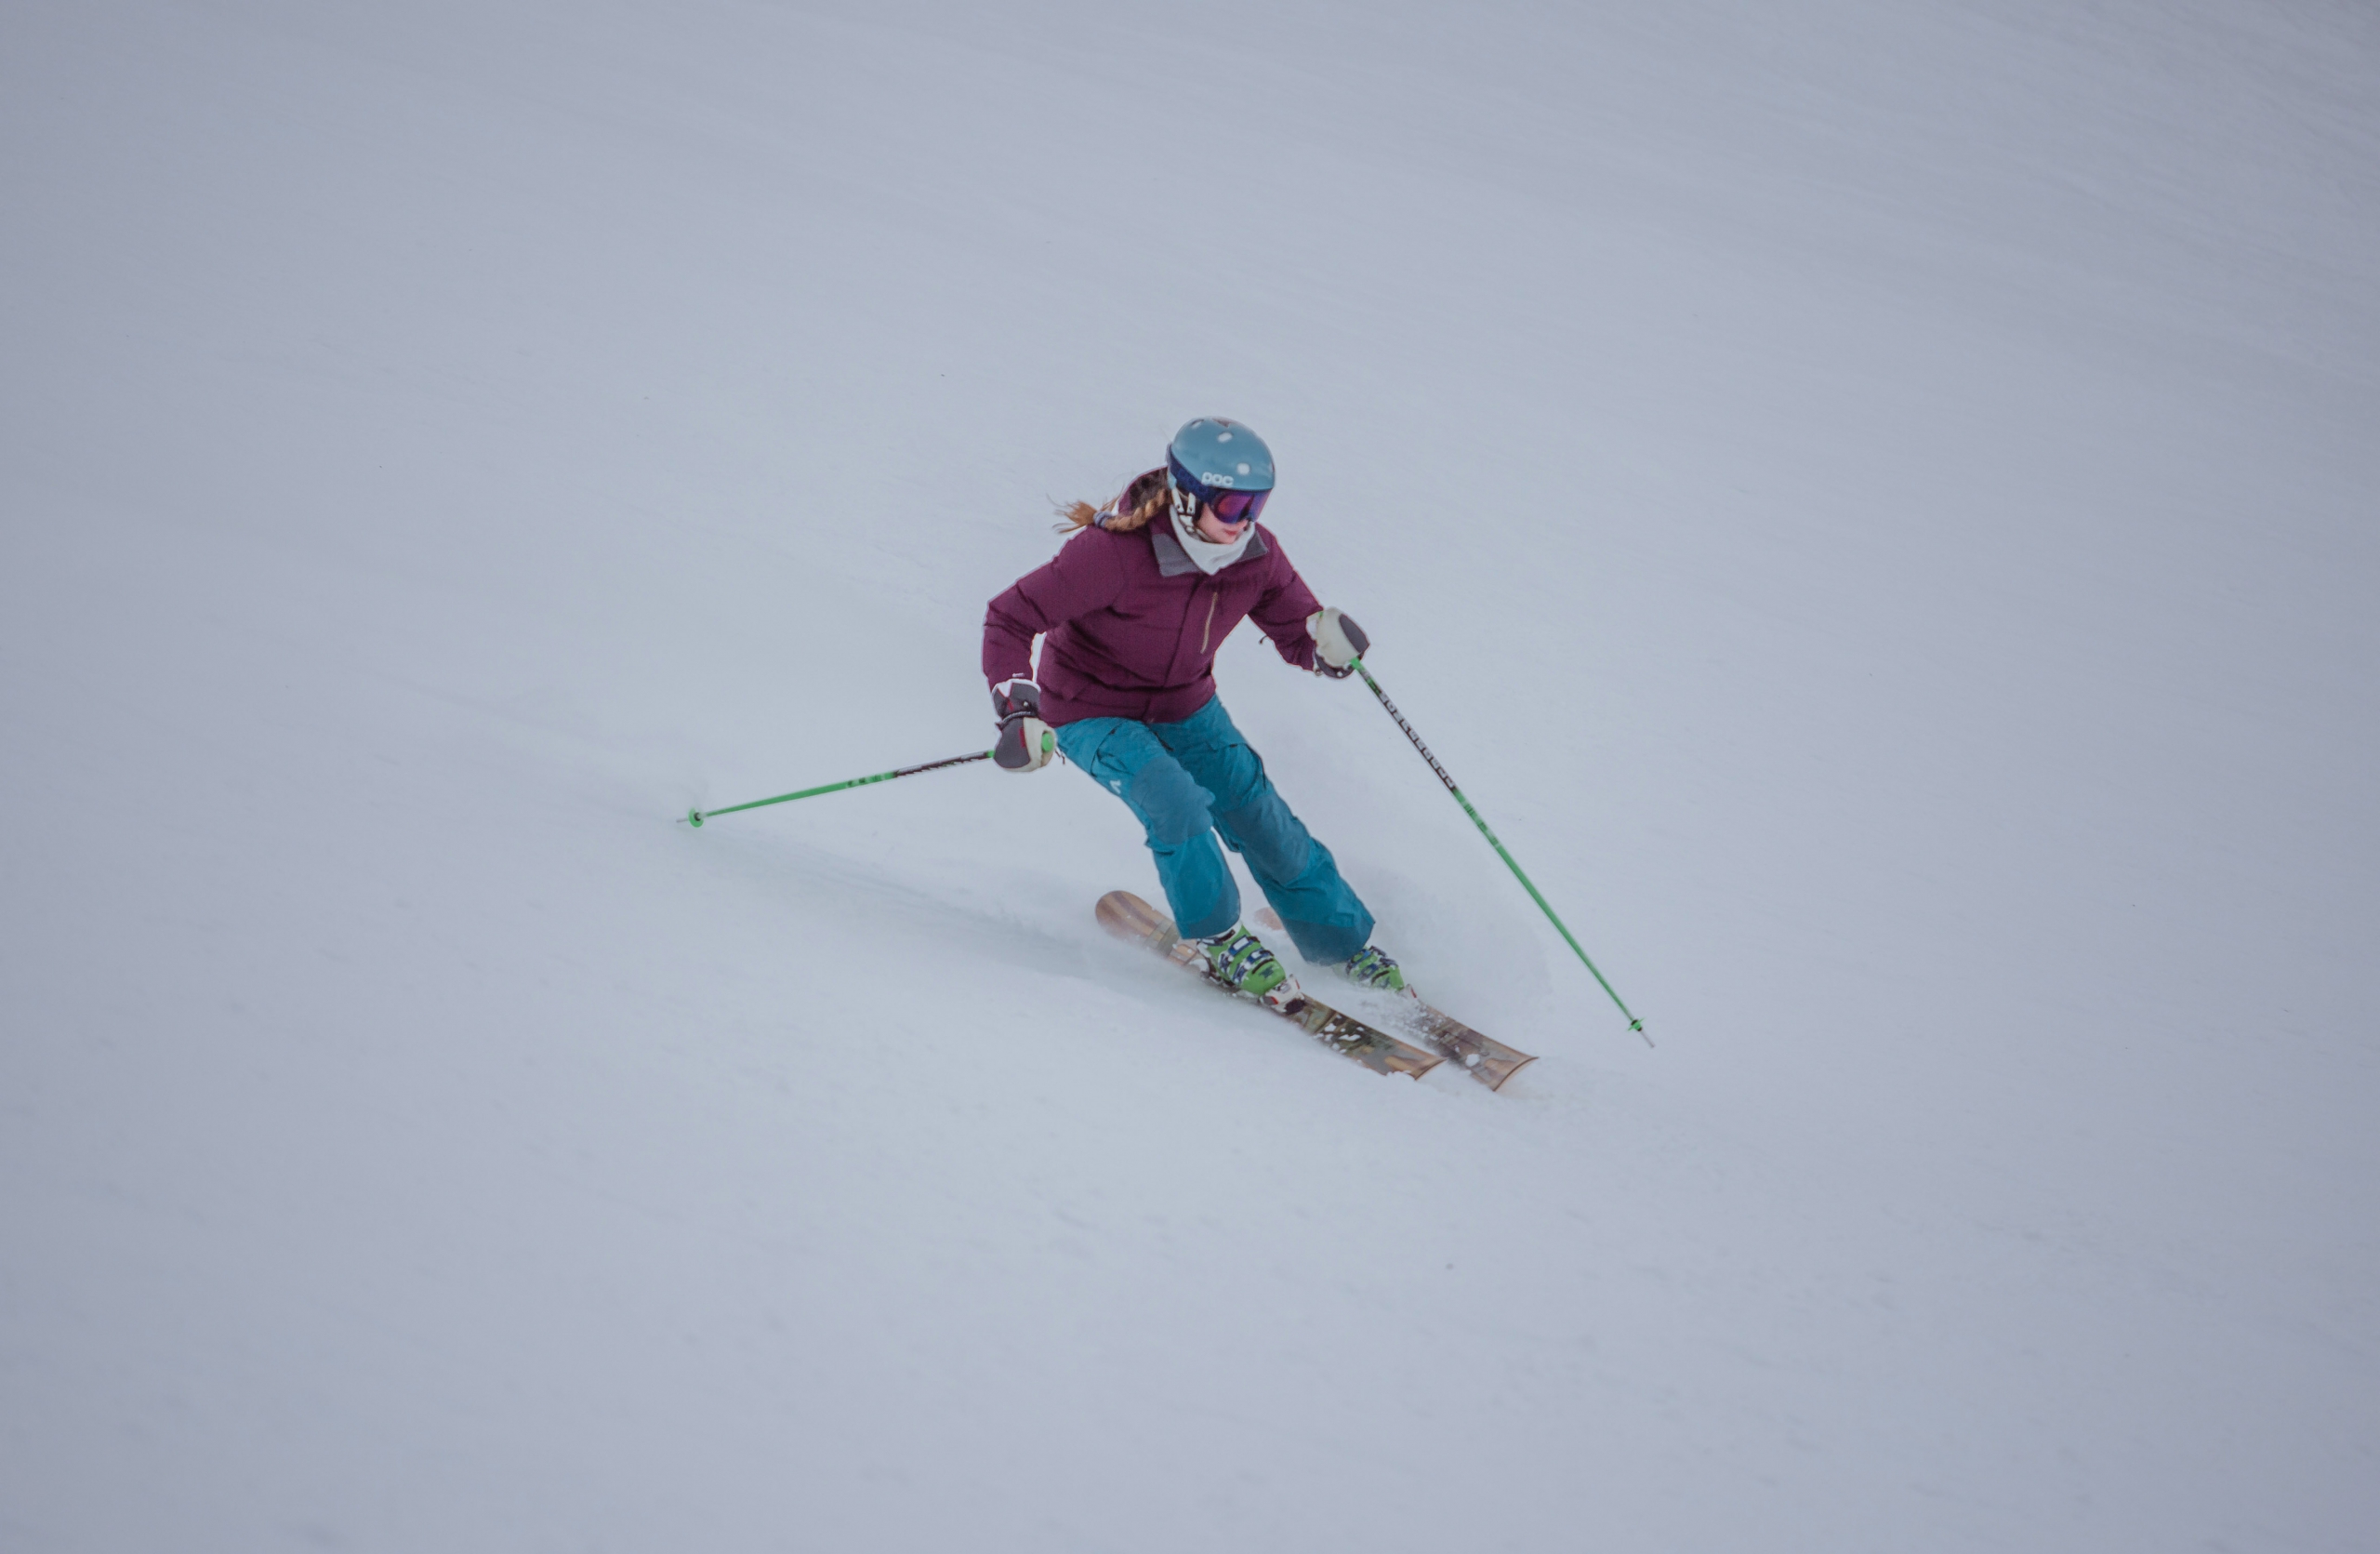 A female teen alpine skier skis down the slope